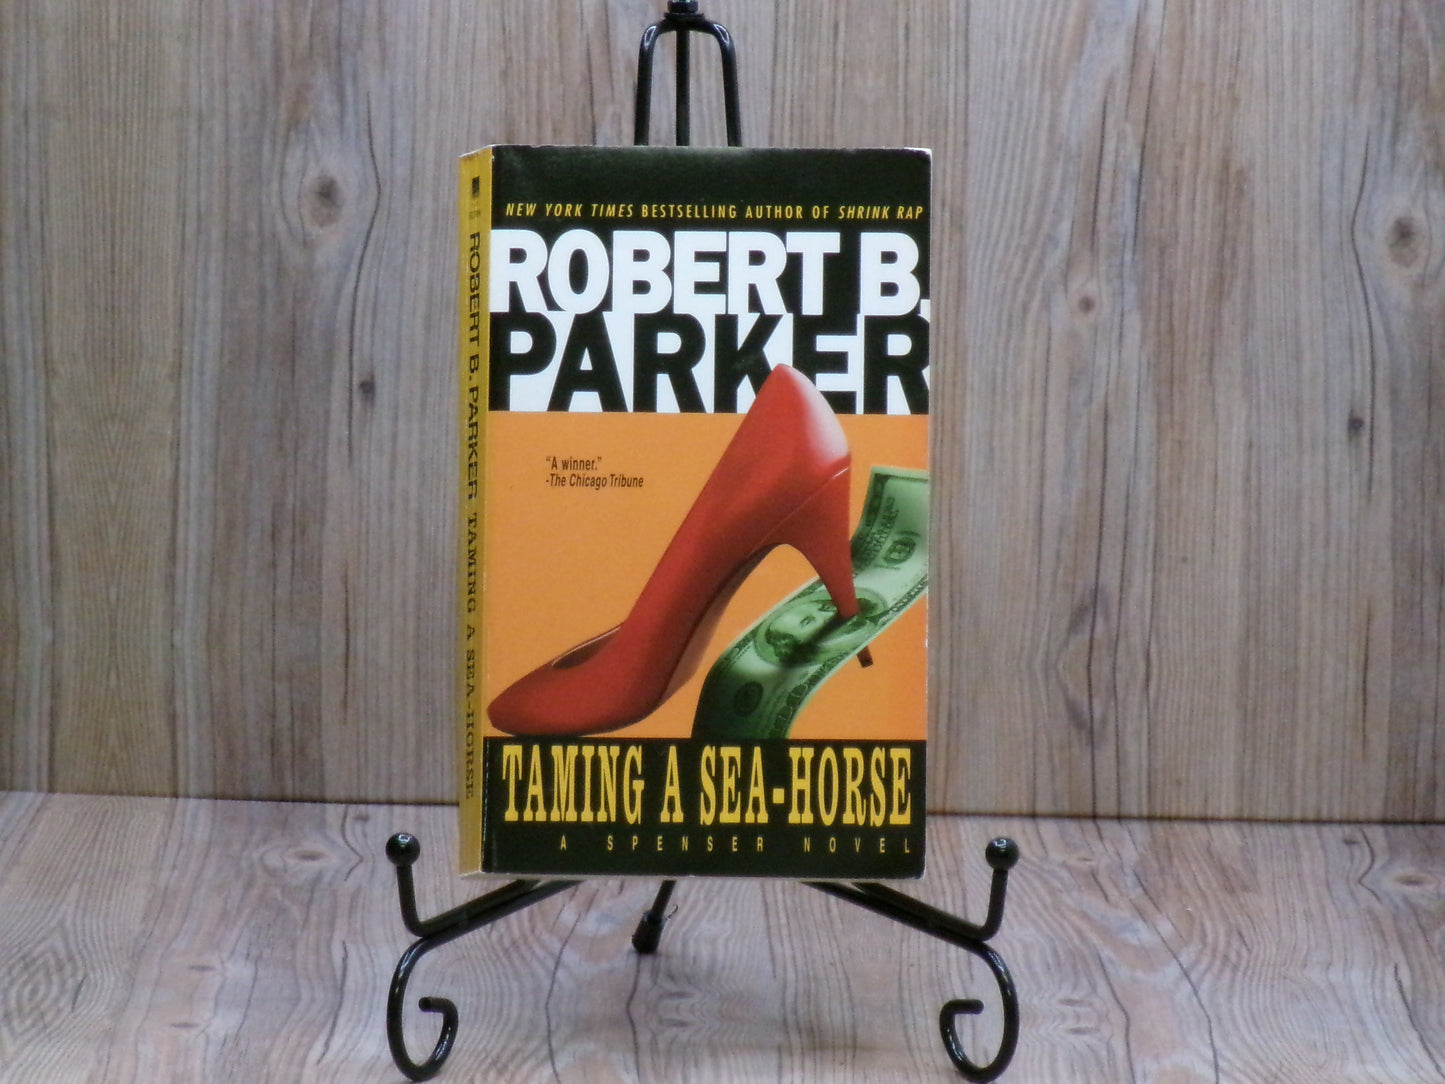 Taming a Sea Horse by Robert B. Parker